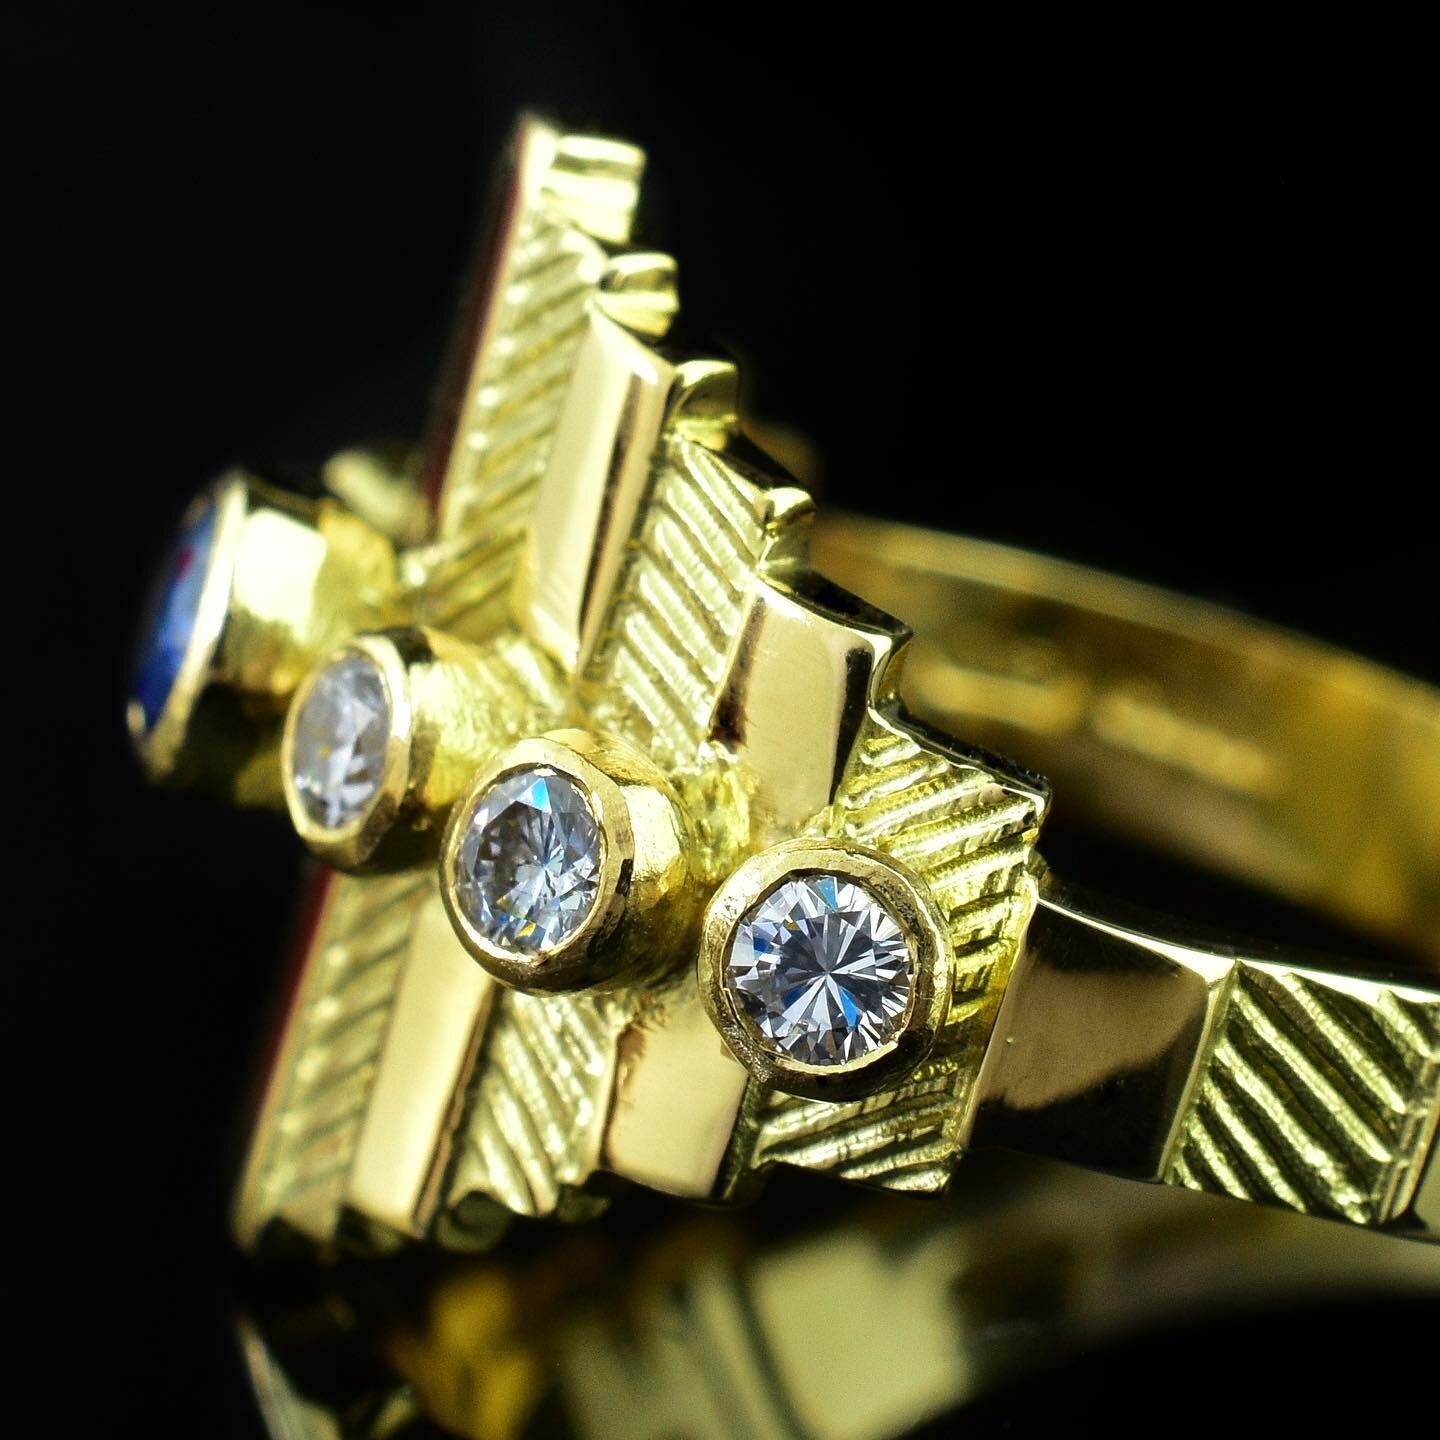 Closer look at the details of this recent commission.
Rich 18ct yellow gold with our distinctive ancient aesthetic. The diamonds and sapphire are  set in heavy beaten settings on top of a wide tapered band.  The ring features our classic ancient trea